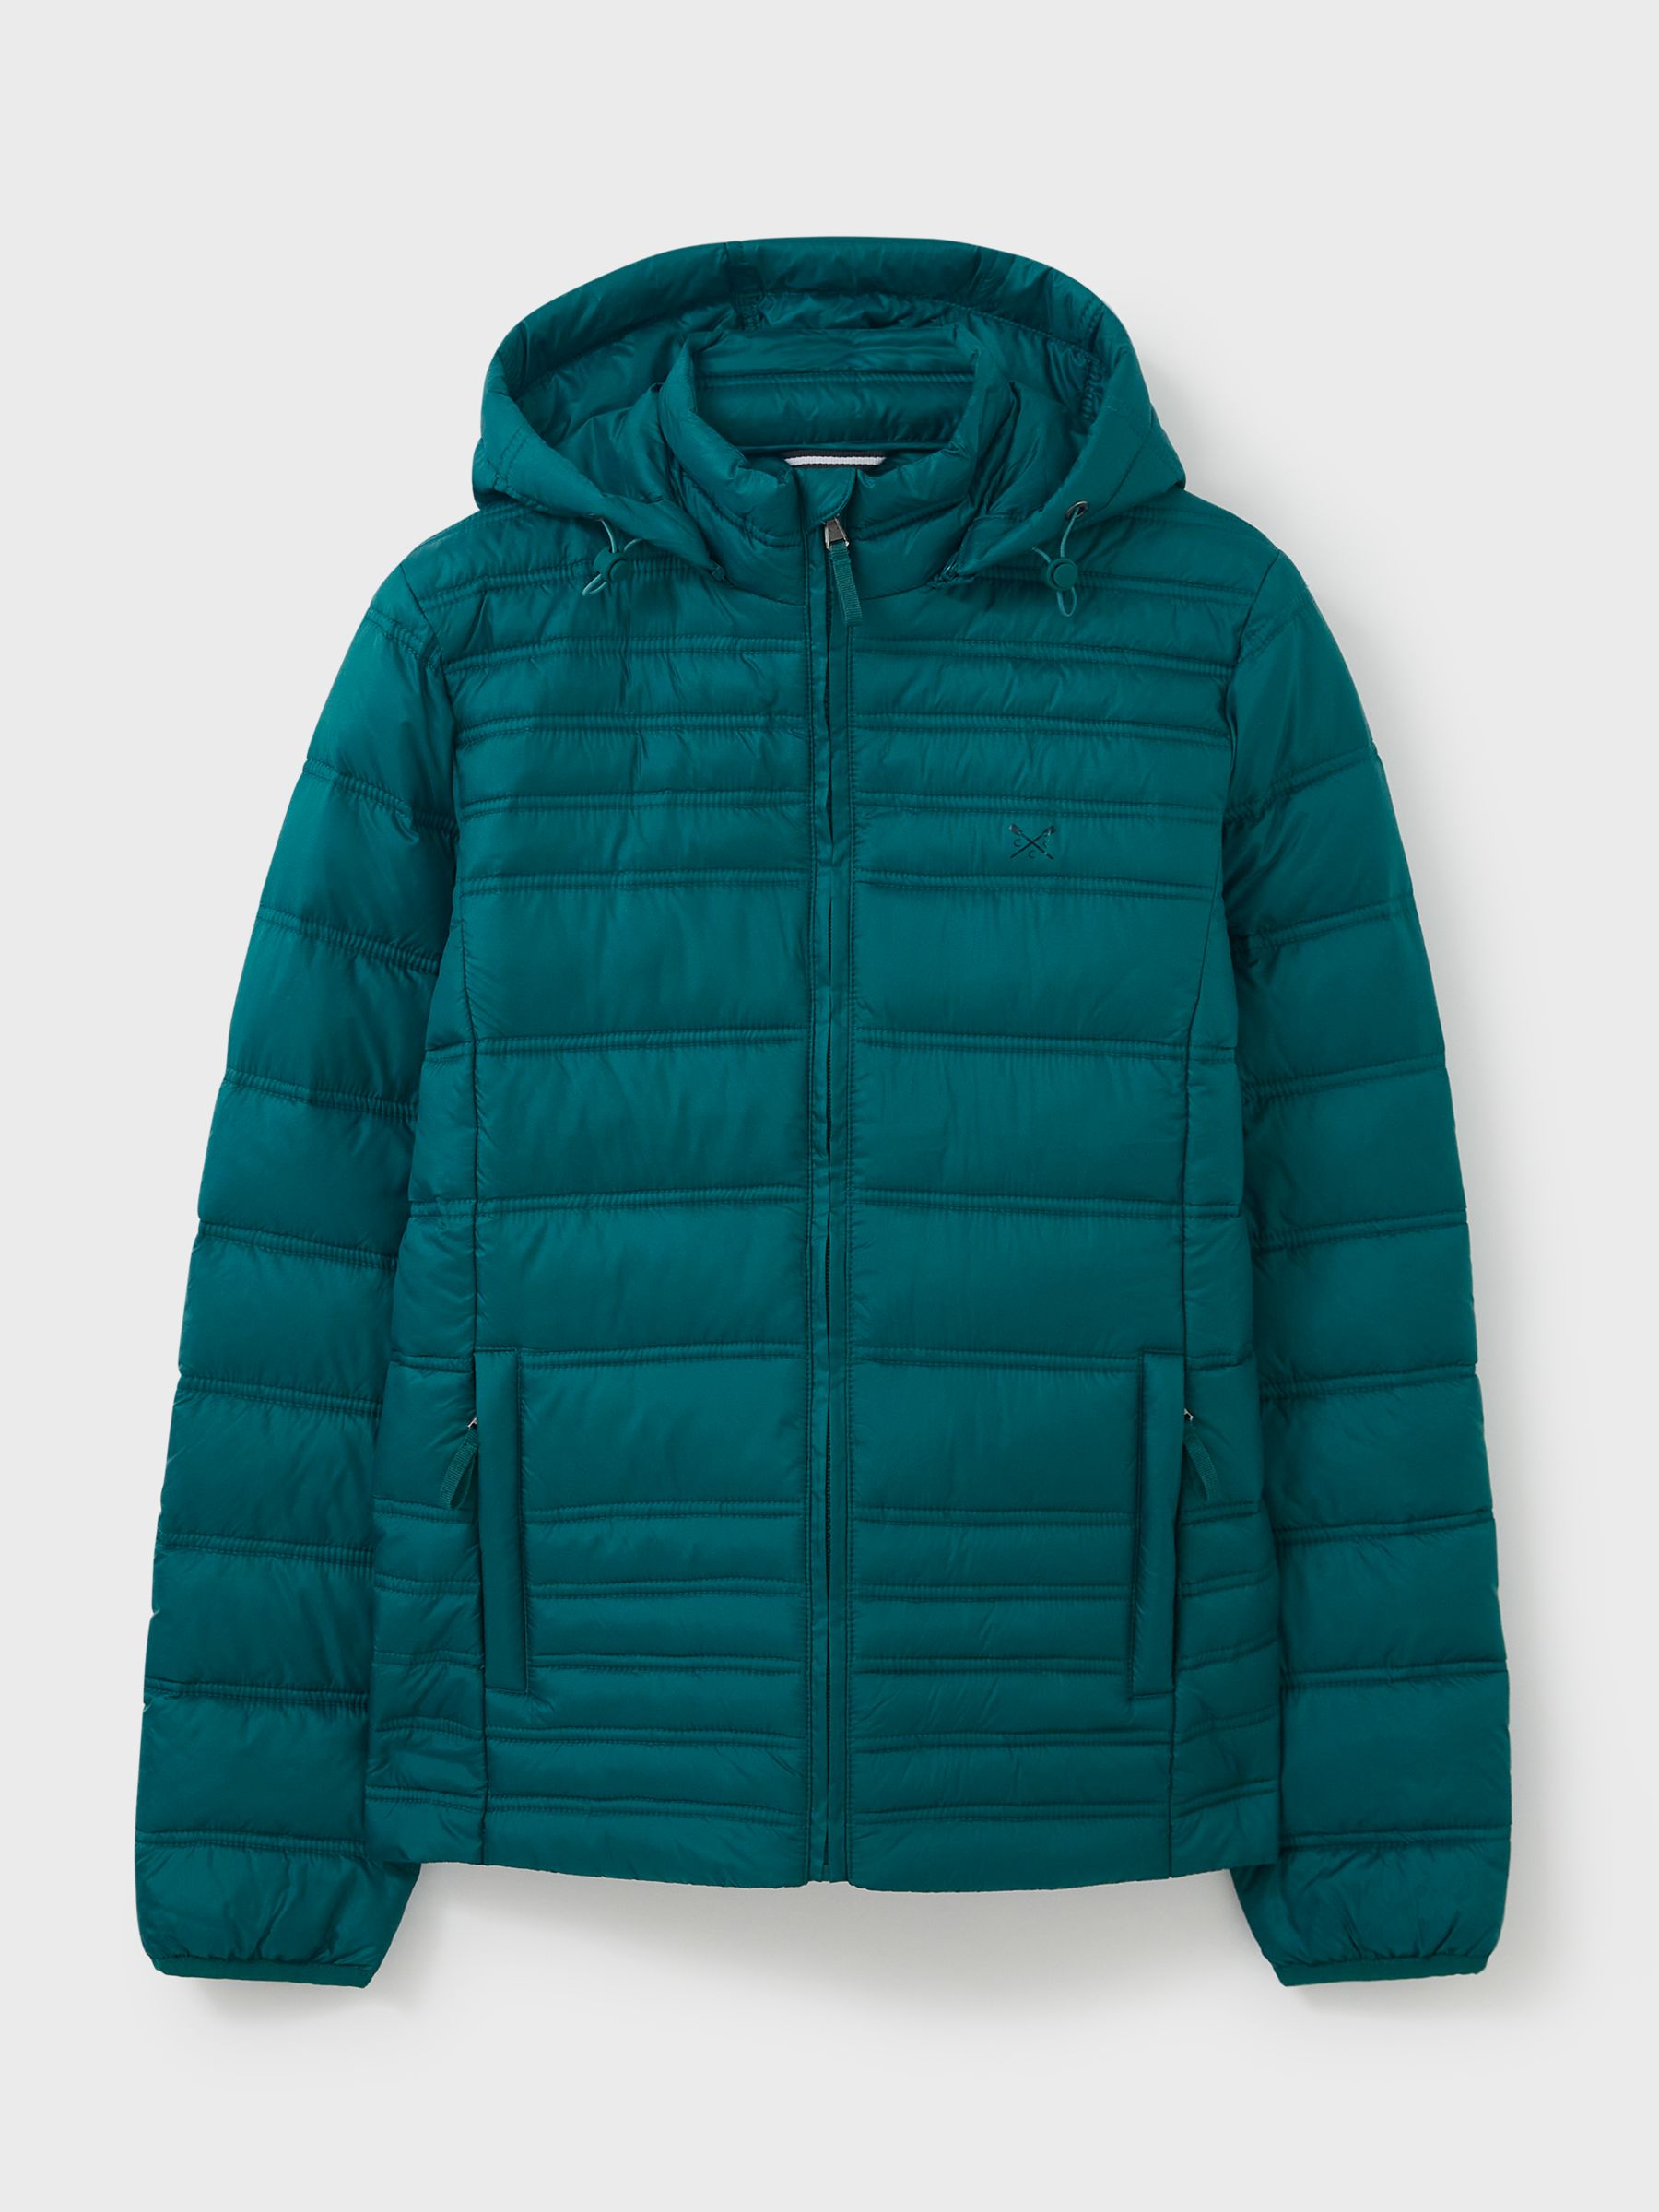 Crew Clothing Lightweight Padded Jacket, Teal Blue, 8